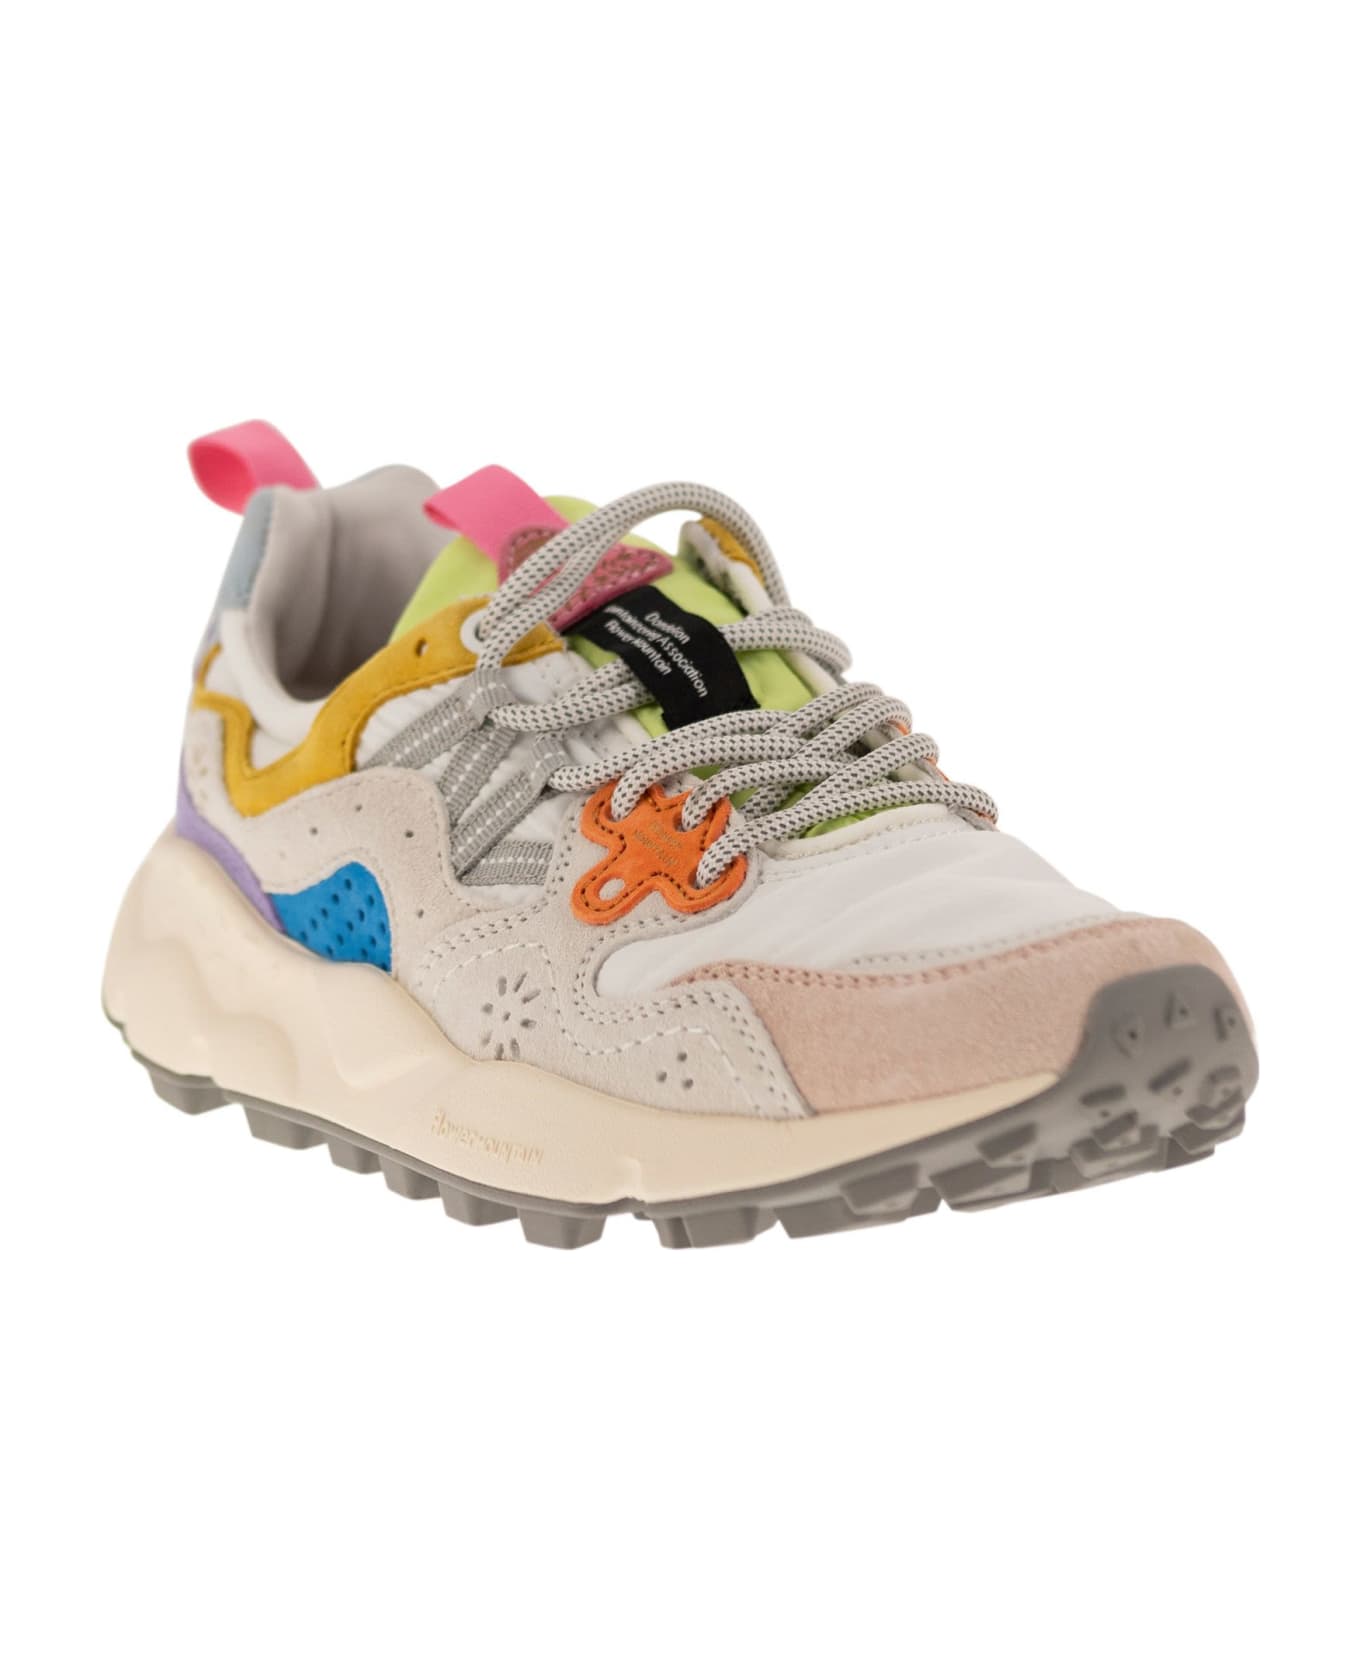 Flower Mountain Yamano 3 - Sneakers In Suede And Technical Fabric - White